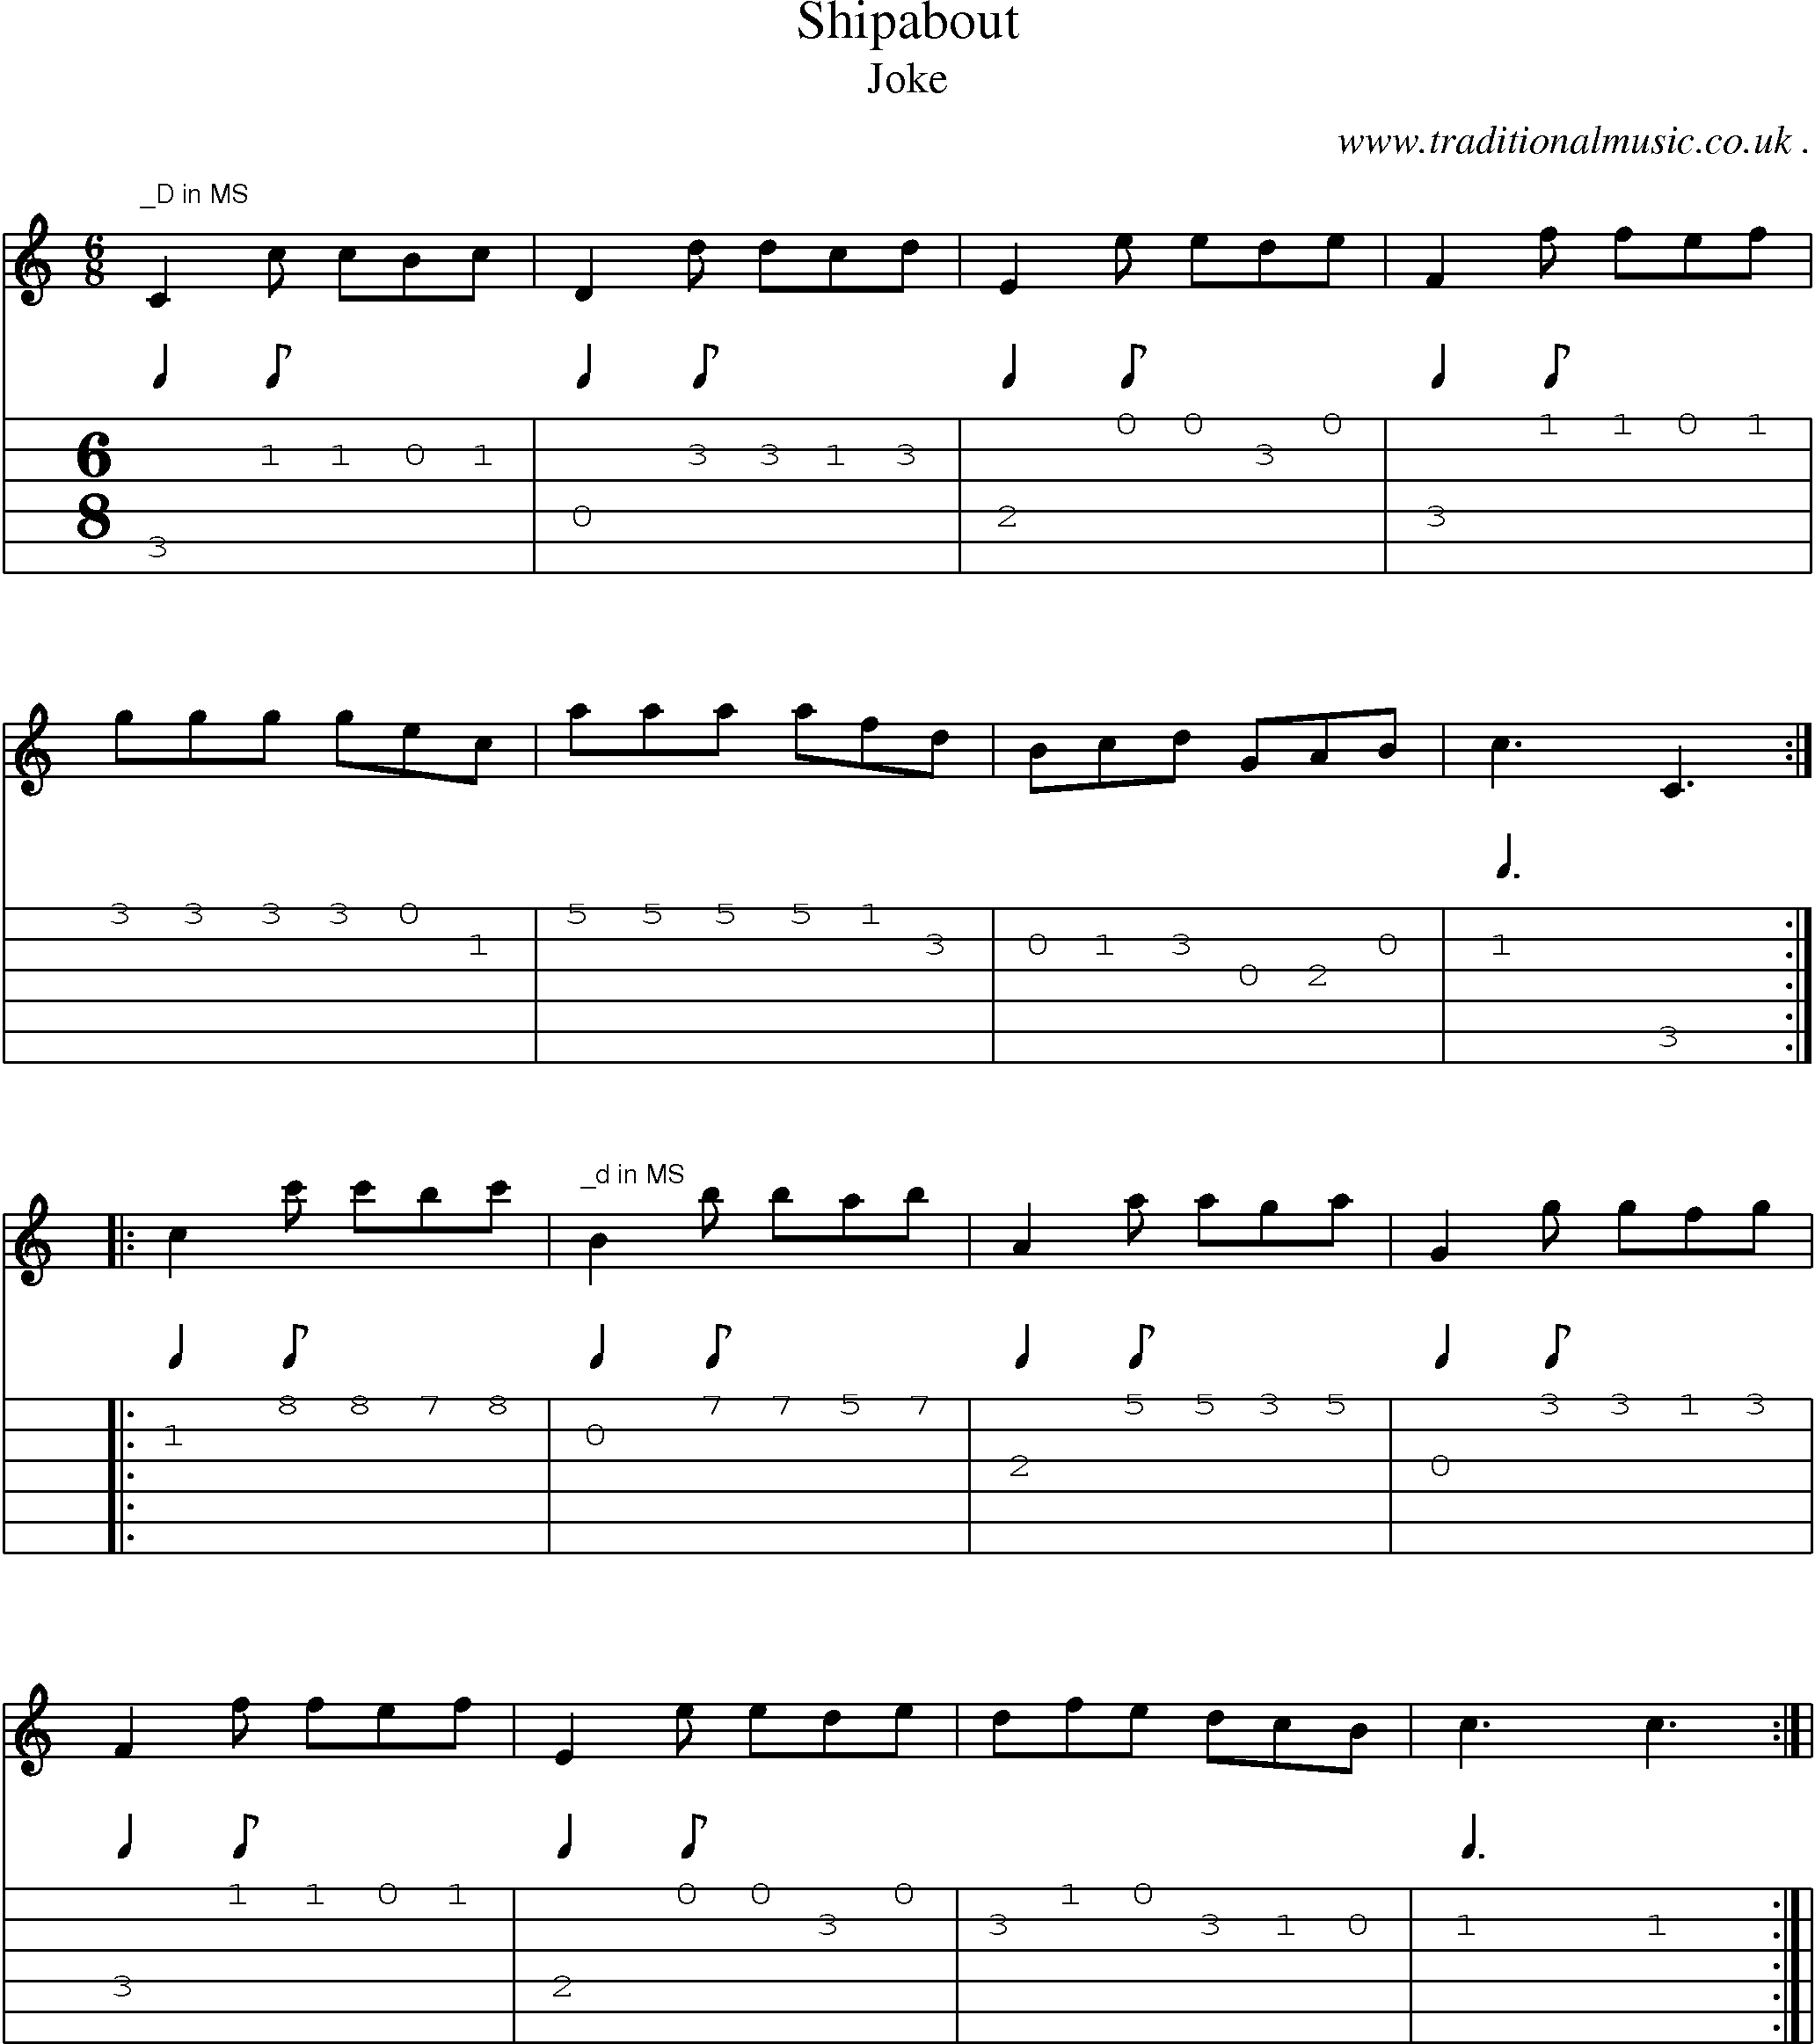 Sheet-Music and Guitar Tabs for Shipabout